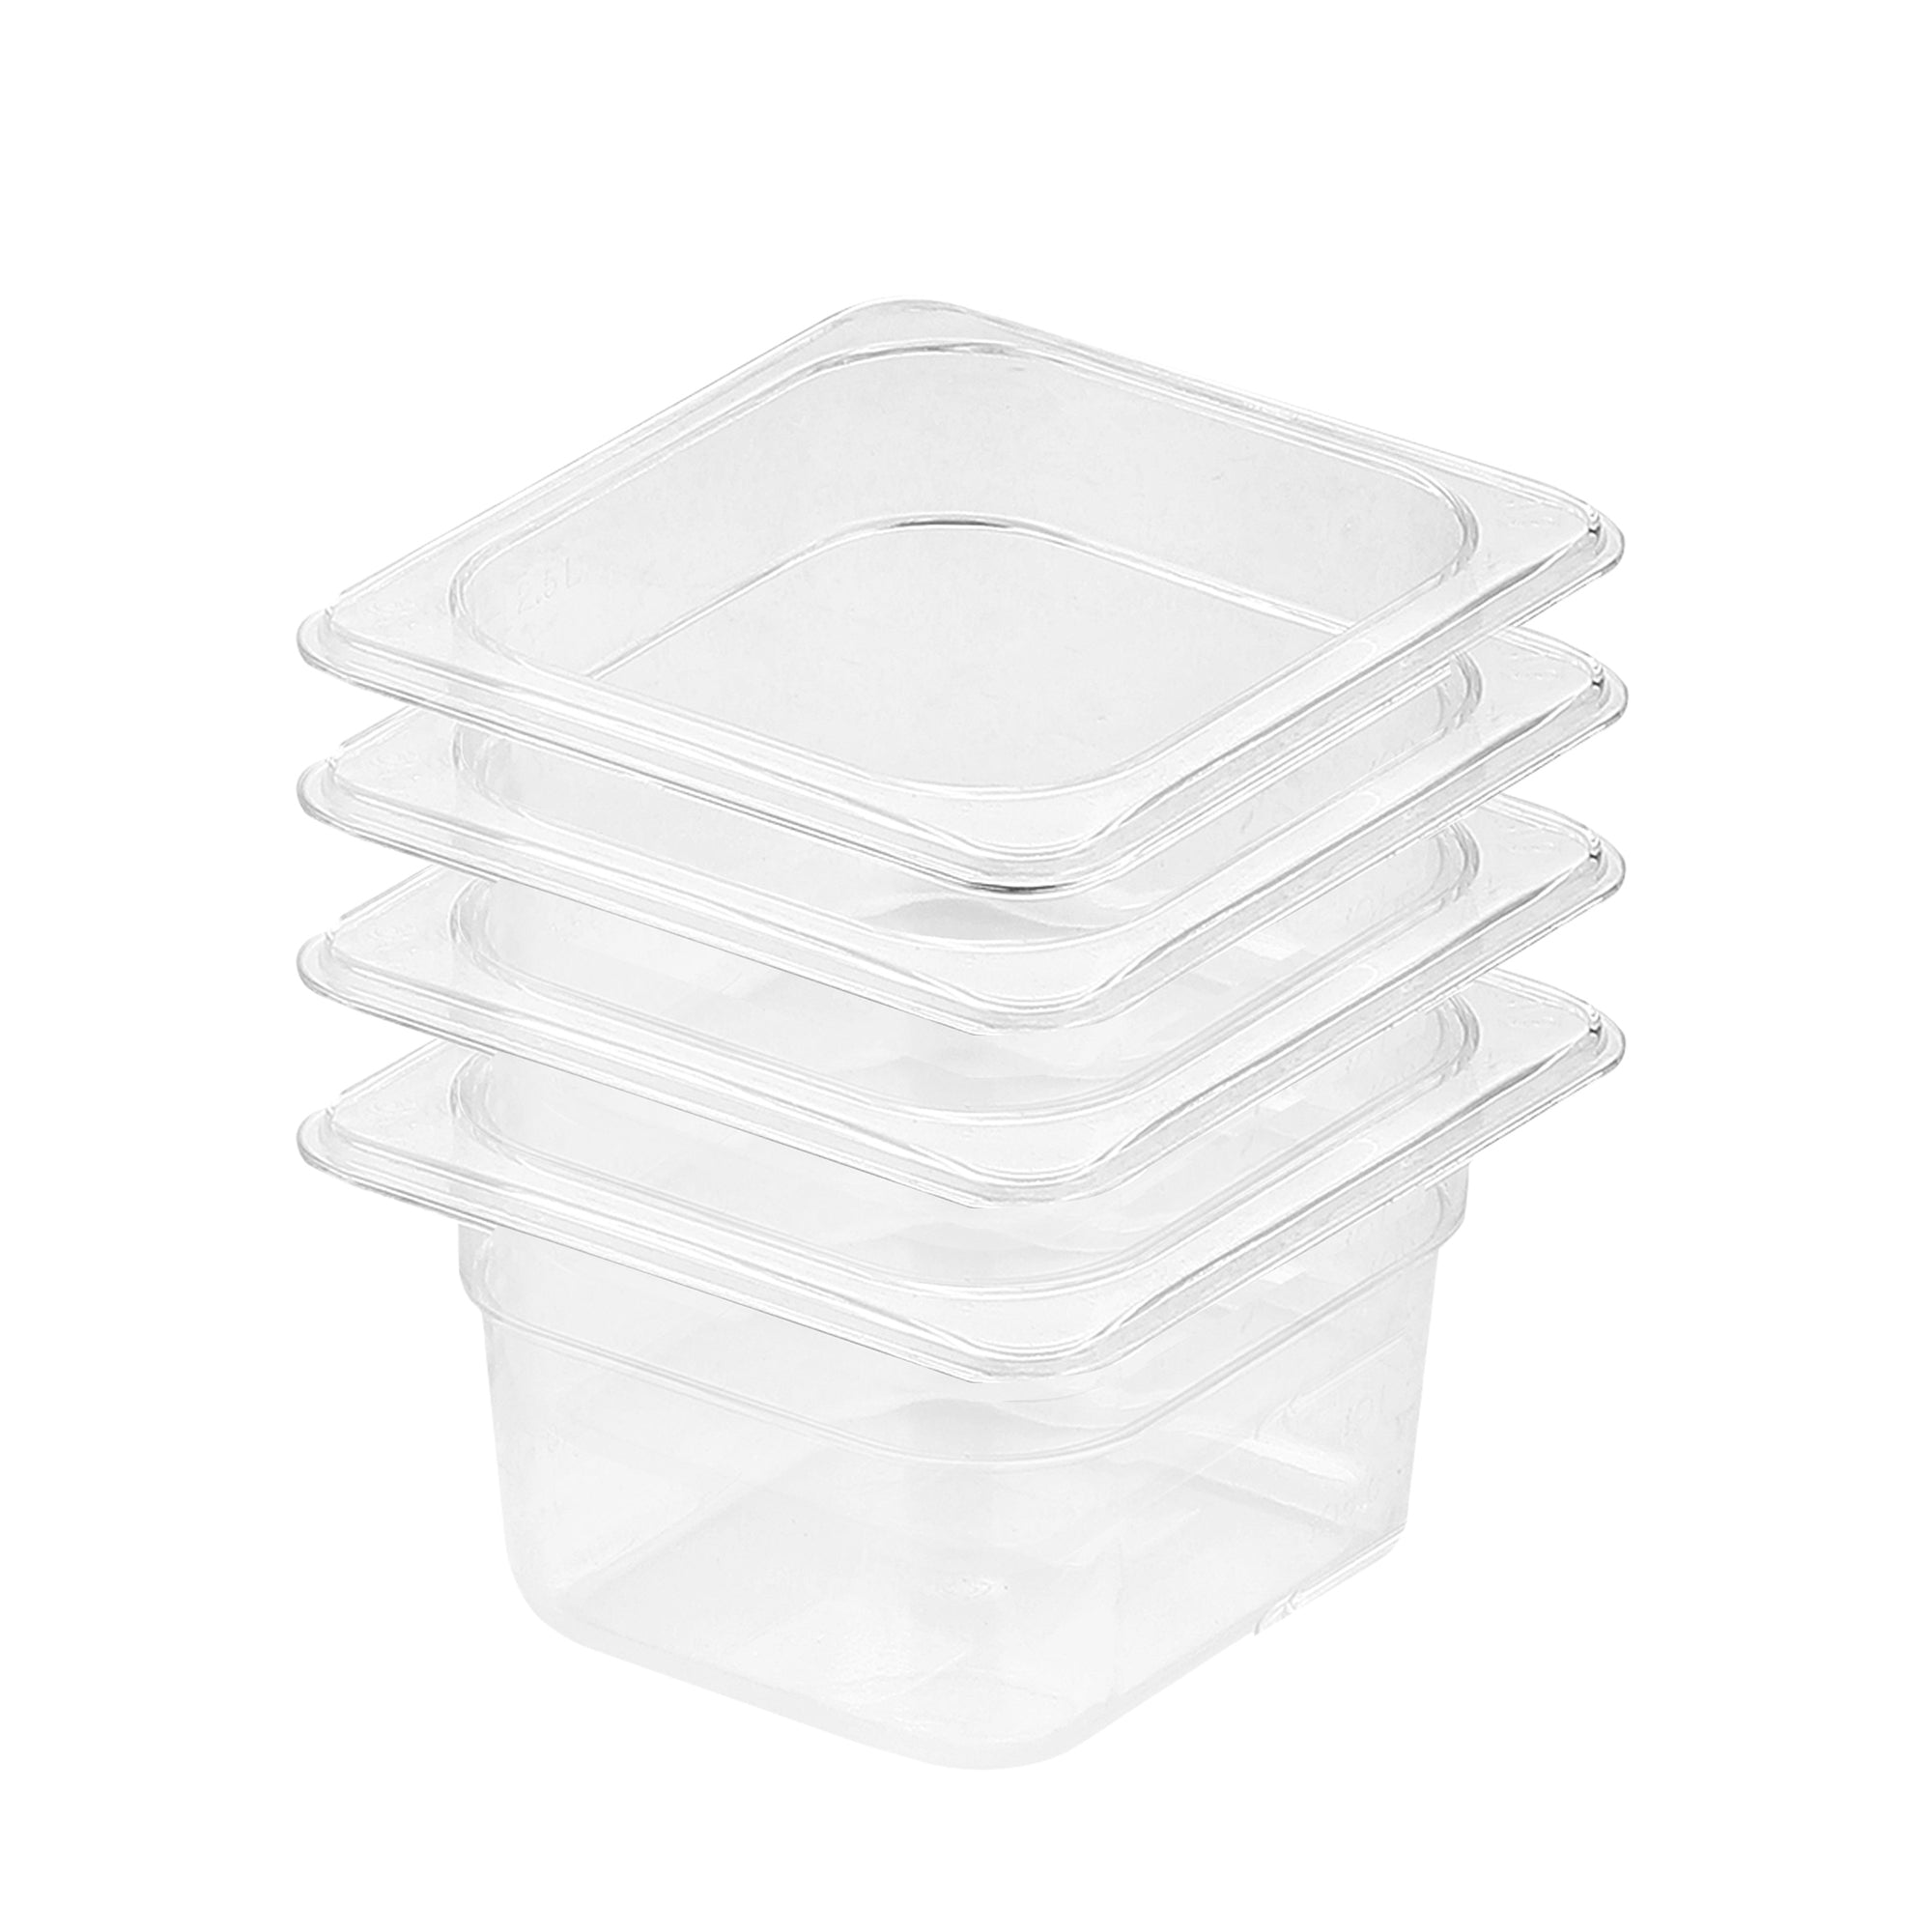 SOGA 100mm Clear Gastronorm GN Pan 1/6 Food Tray Storage Bundle of 4